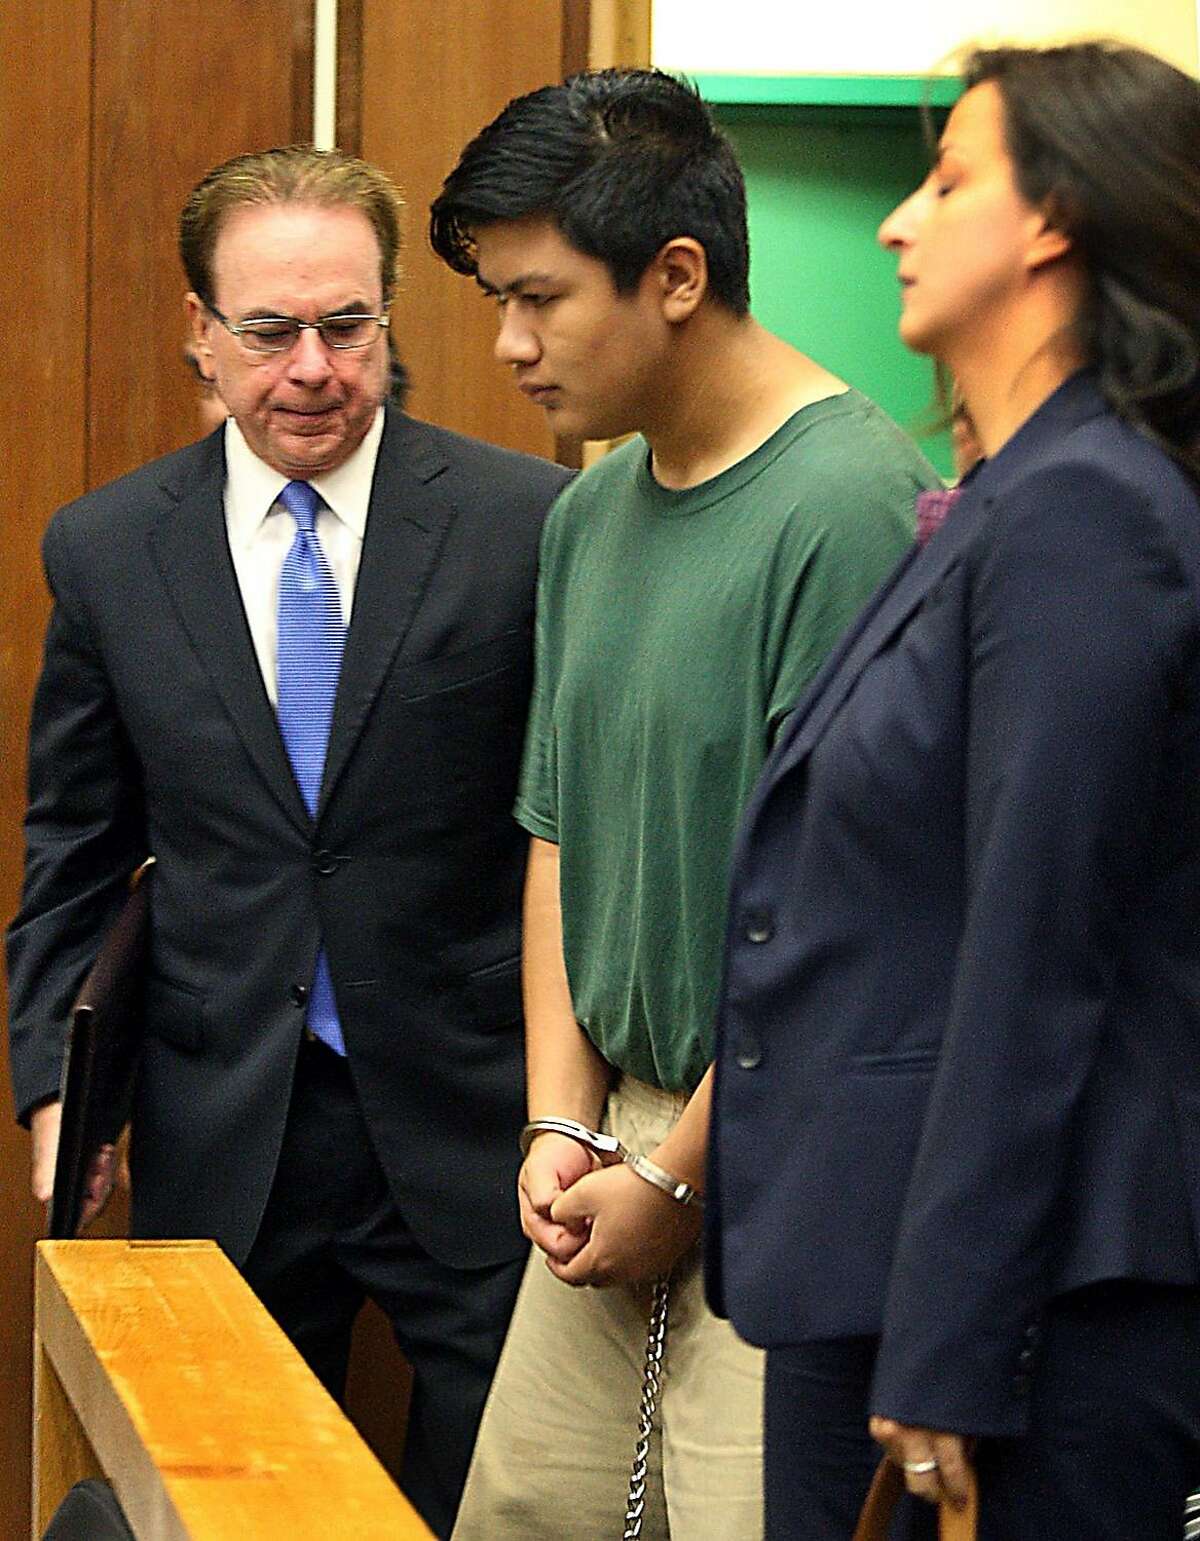 Adrian Jerry Gonzalez, center, is flanked by public defender Larry Biggam and attorney Leila Sayar as they enter the courtroom Thursday, July 30, 2015 where his arraignment was delayed in Santa Cruz, Calif. Gonzalez charged with murder, kidnapping and rape in the death of 8-year-old Madyson Middleton, in an artists' complex in the California beach town. 